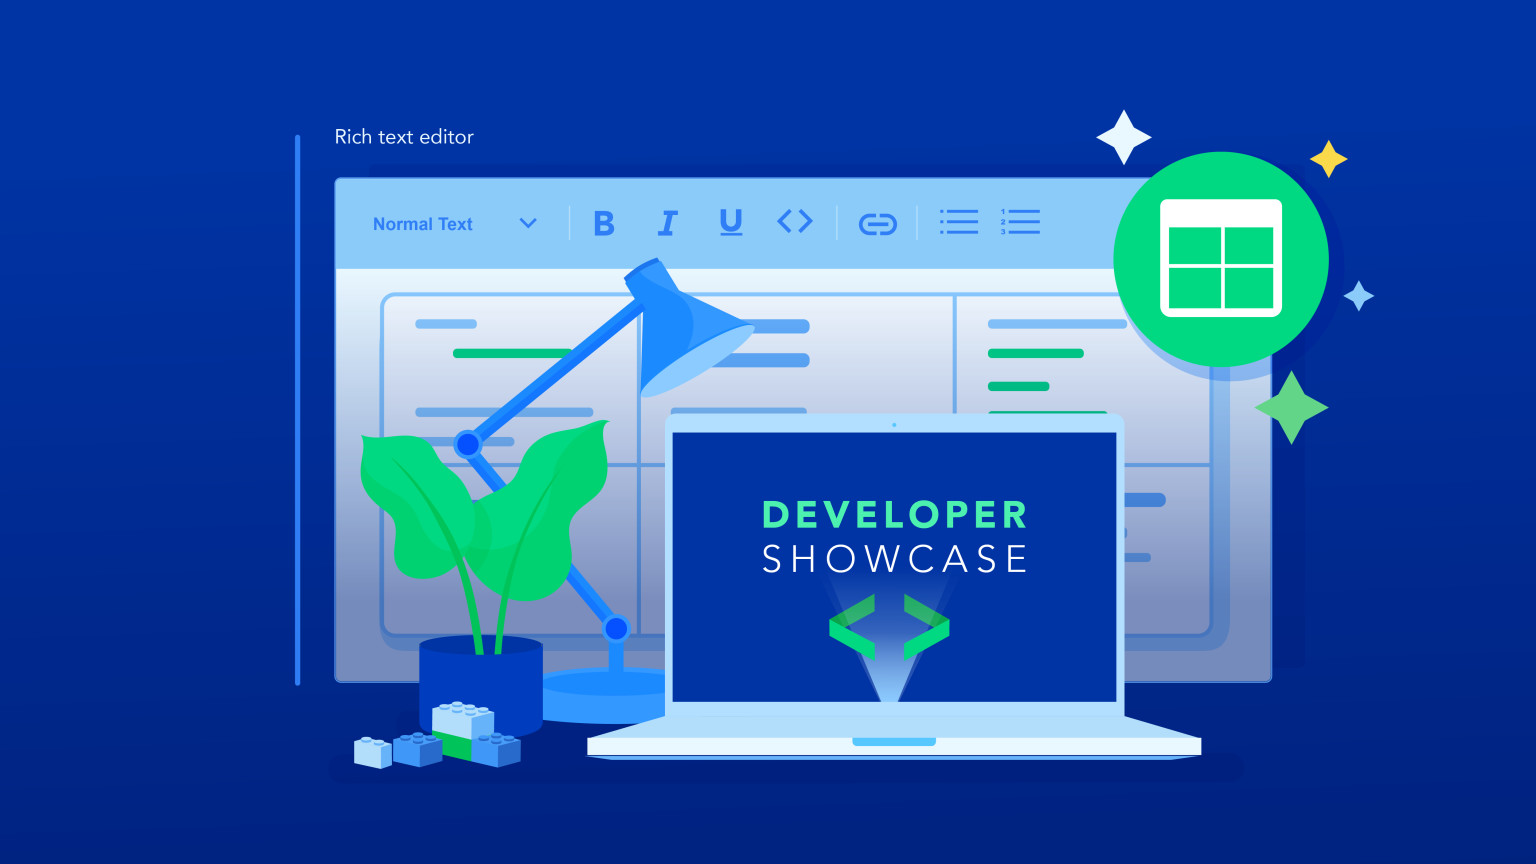 Developer newsletter: The Contentful Developer Showcase will highlight amazing projects from the community, and the Rich Text tables feature is live.